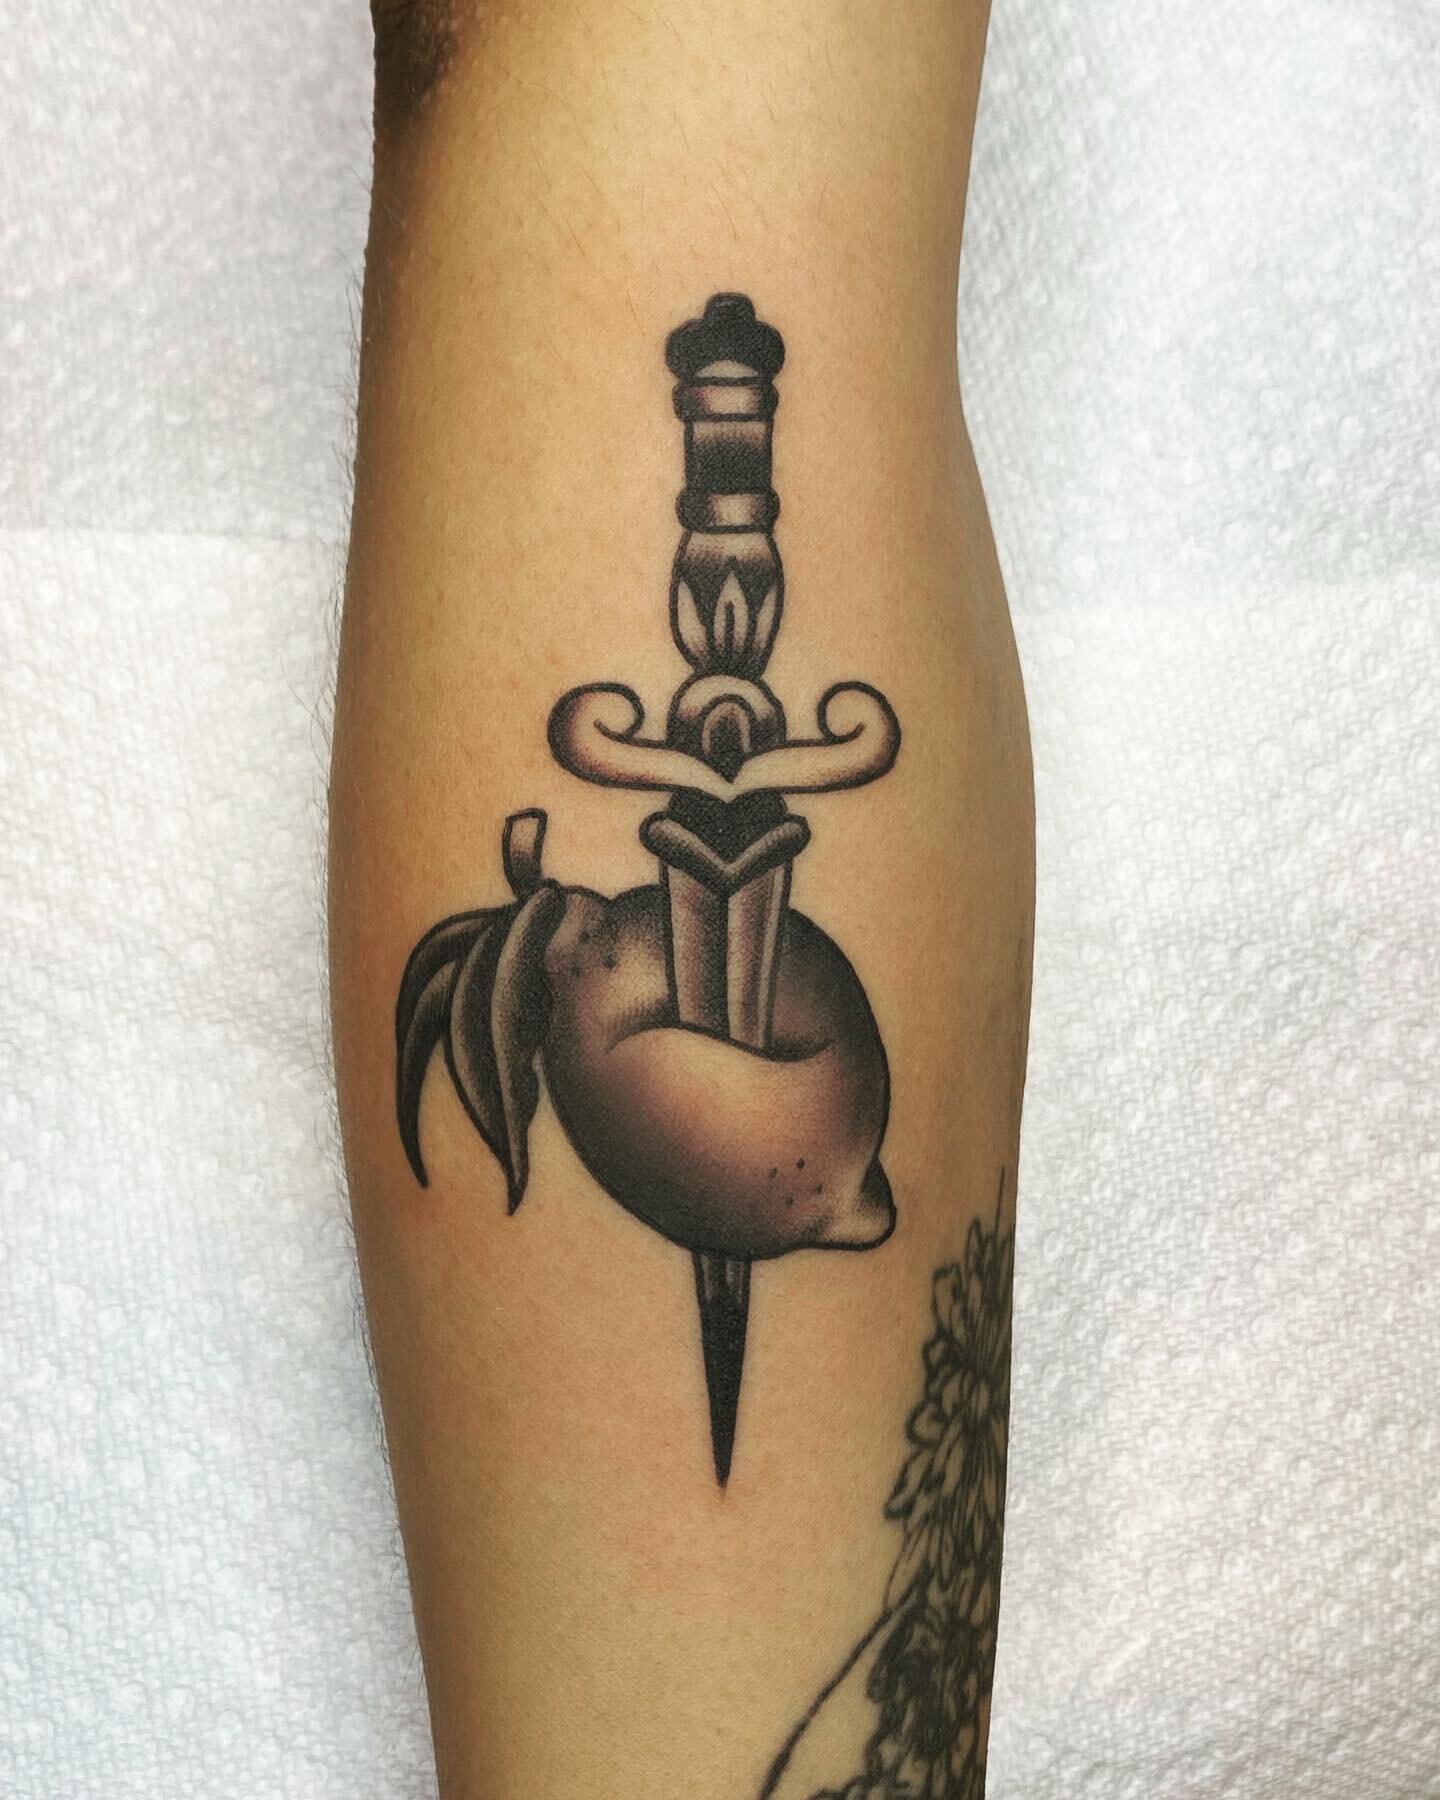 custom dagger for melanie! thanks for getting a tattoo during your trip

done at @familytattoo